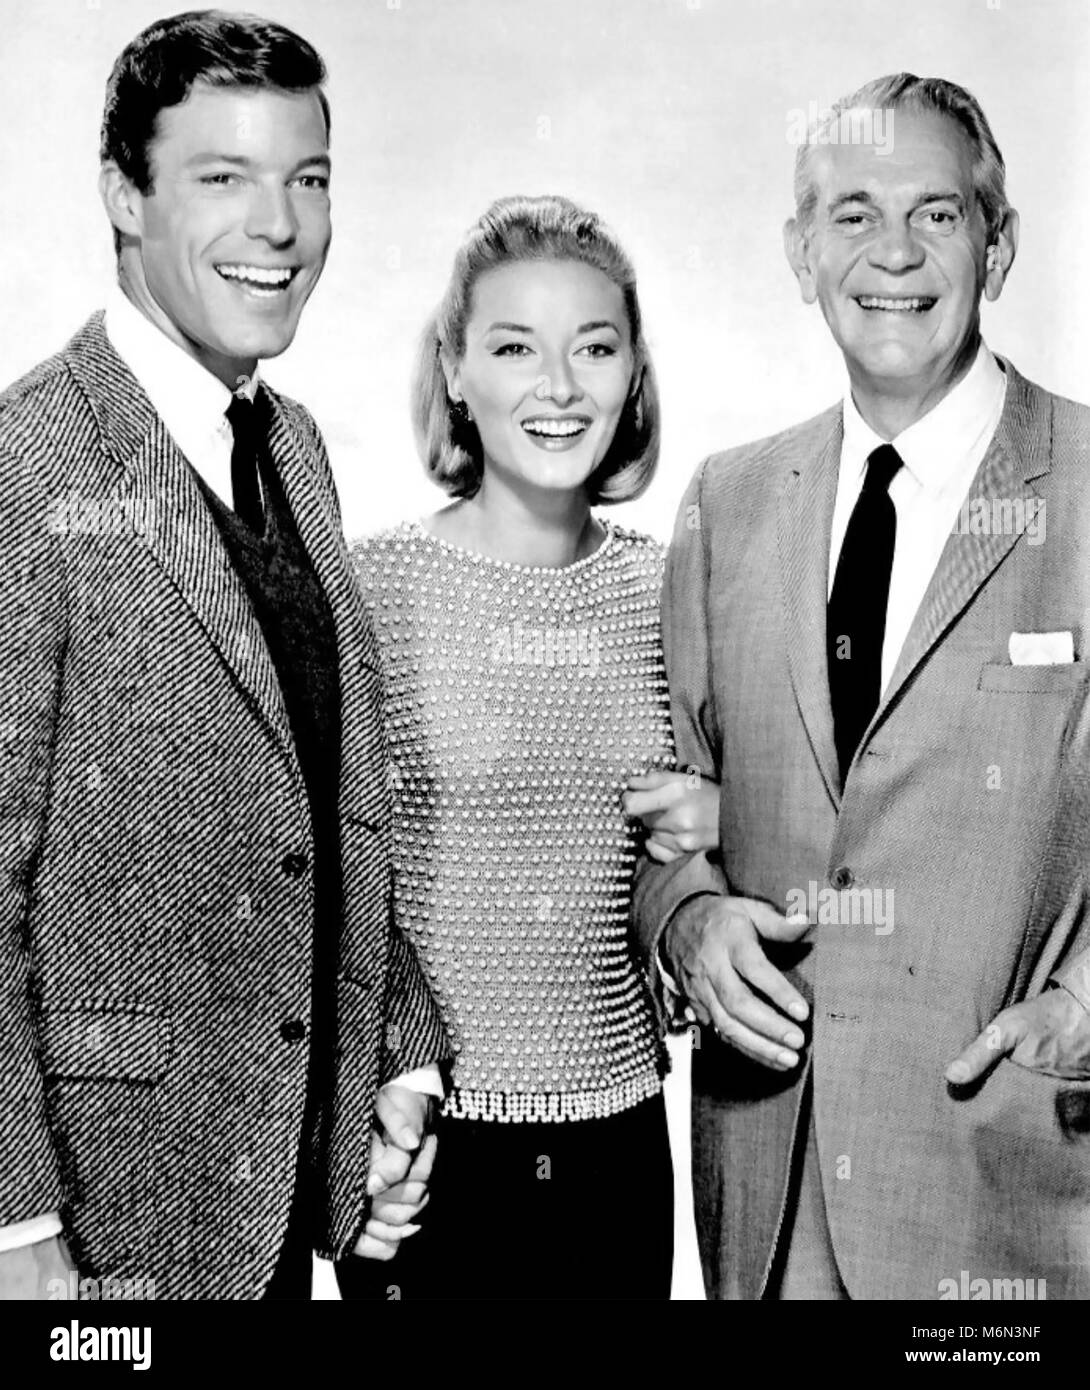 DR KILDARE NBC TV series 1961-1966. Publicity photo from, the episode 'Rome Will Never Leave You' with from left Richard Chamber;ain, Daniela Bianchi, Raymond Massey Stock Photo